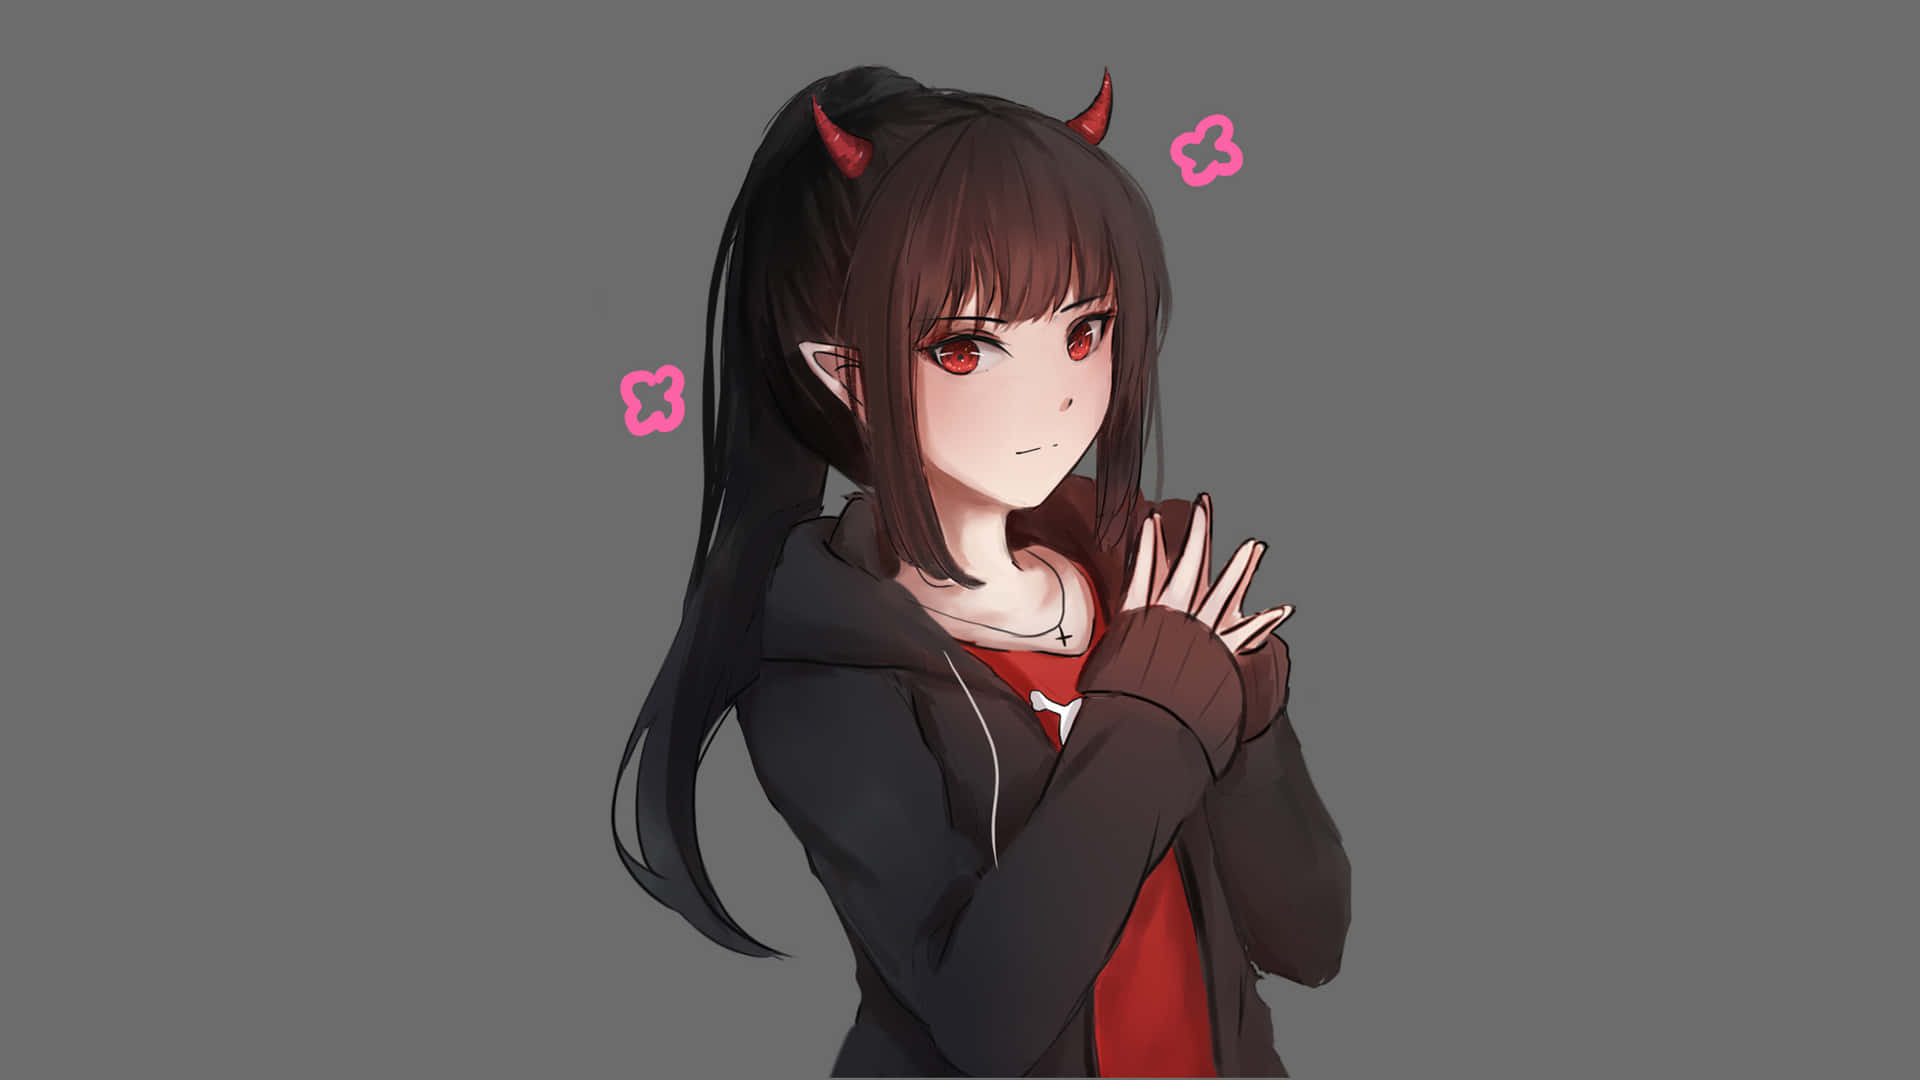 A female character in a red and black school uniform Wallpaper